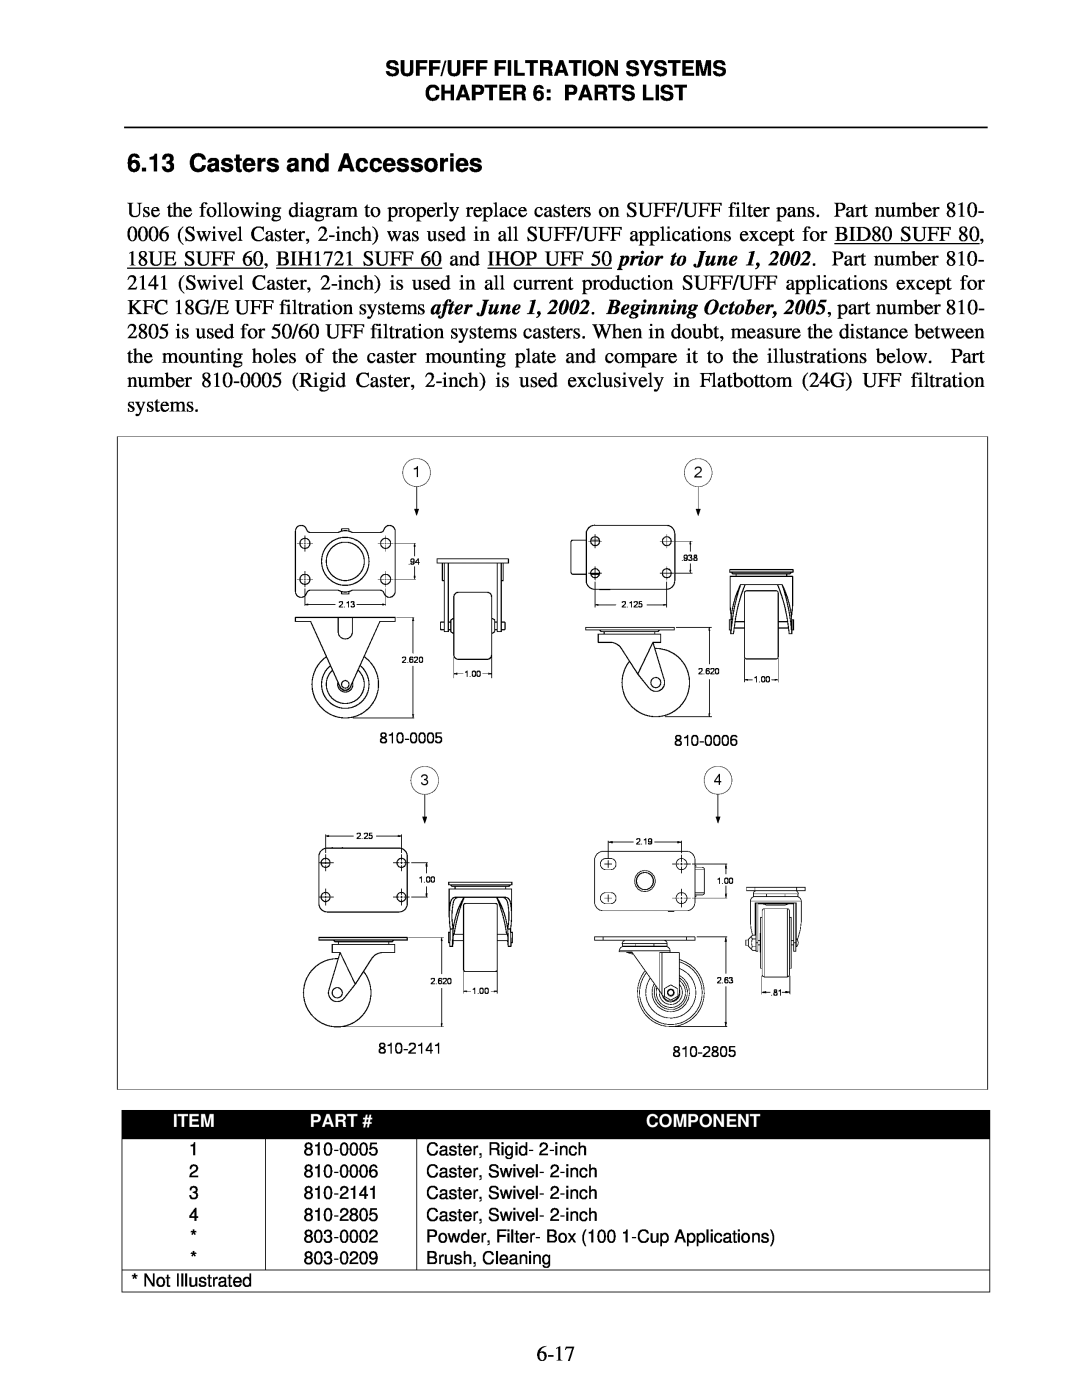 Frymaster 8195809 operation manual Casters and Accessories, Suff/Uff Filtration Systems Parts List 